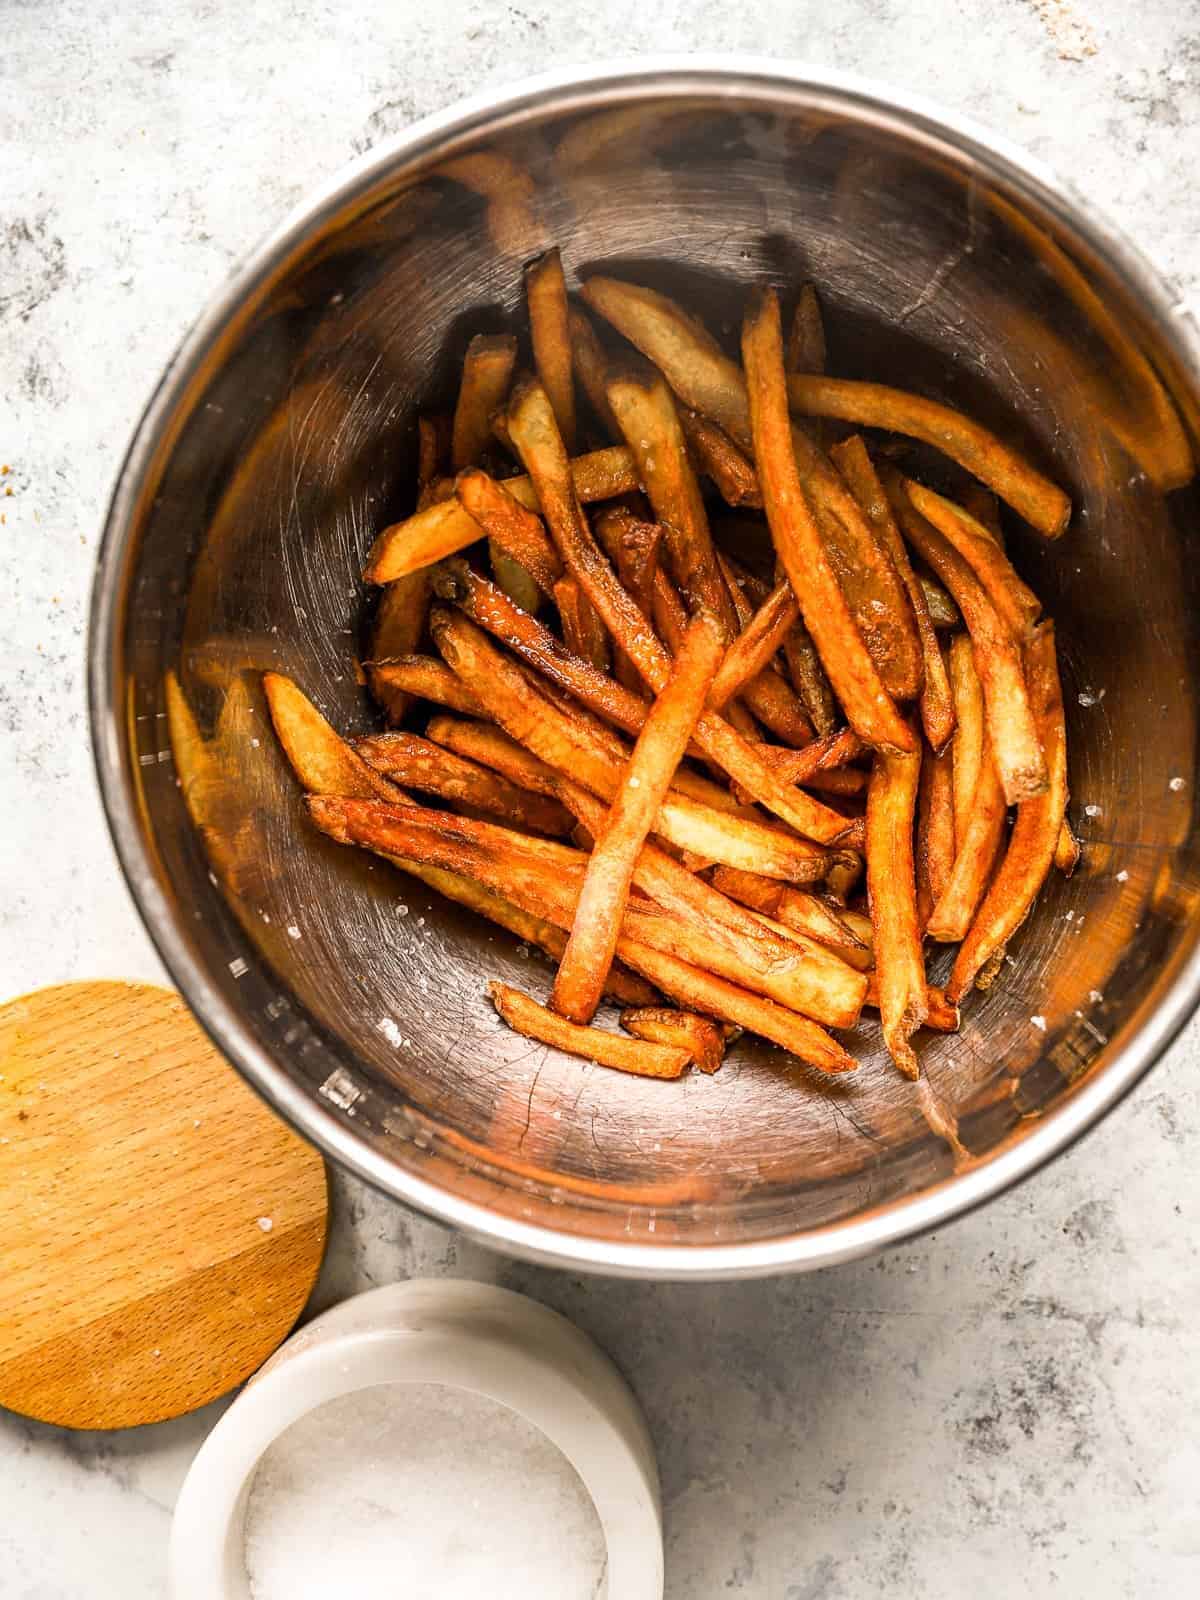 homemade french fries in a stainless steel bowl with salt.